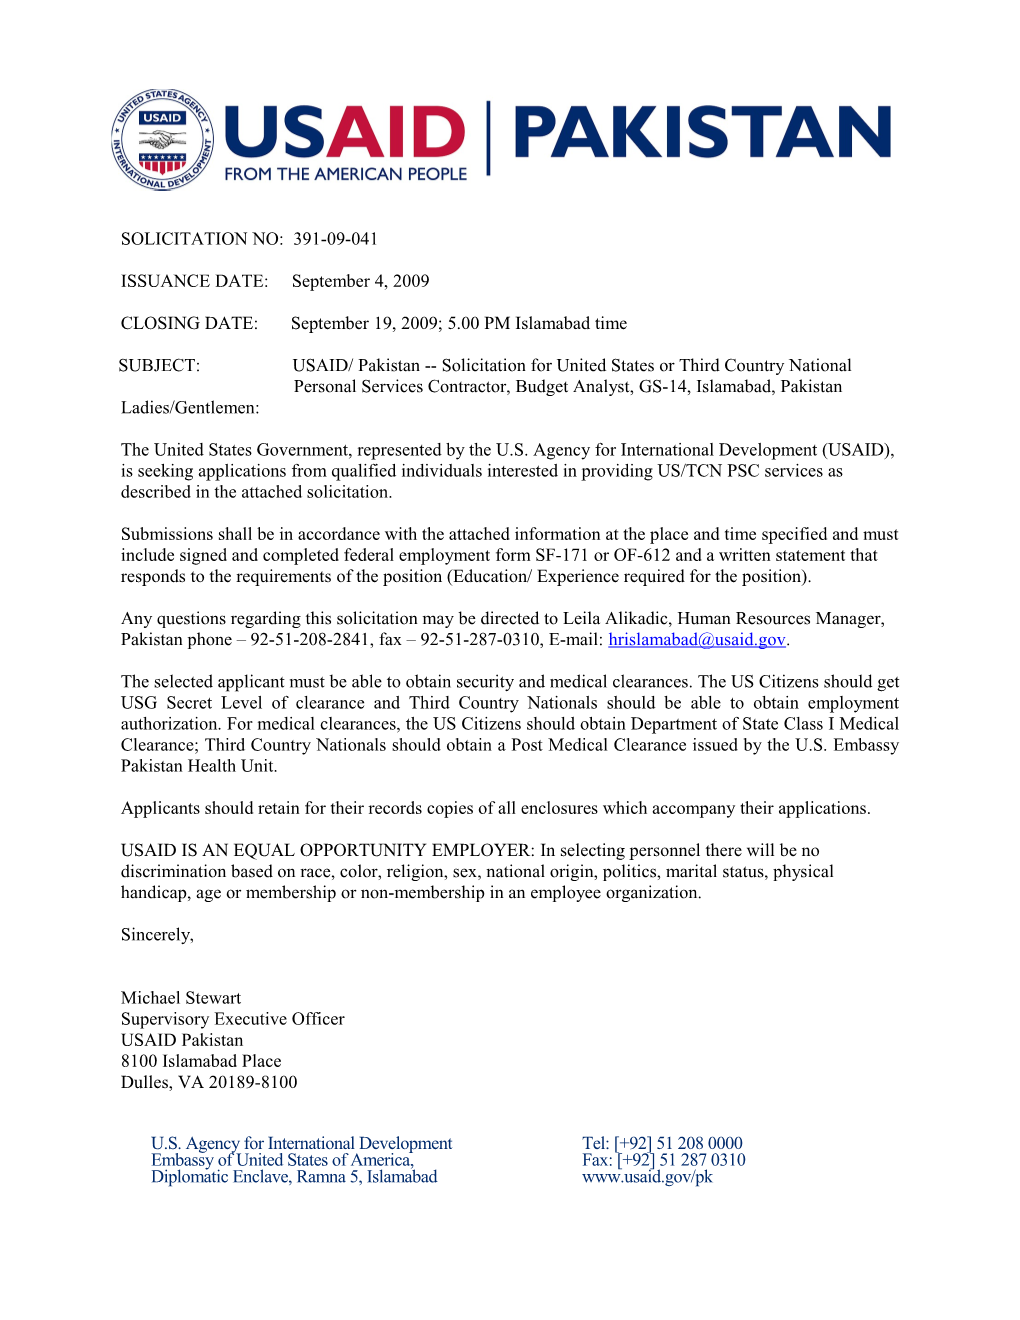 SUBJECT: USAID/ Pakistan Solicitation for United States Or Third Country National